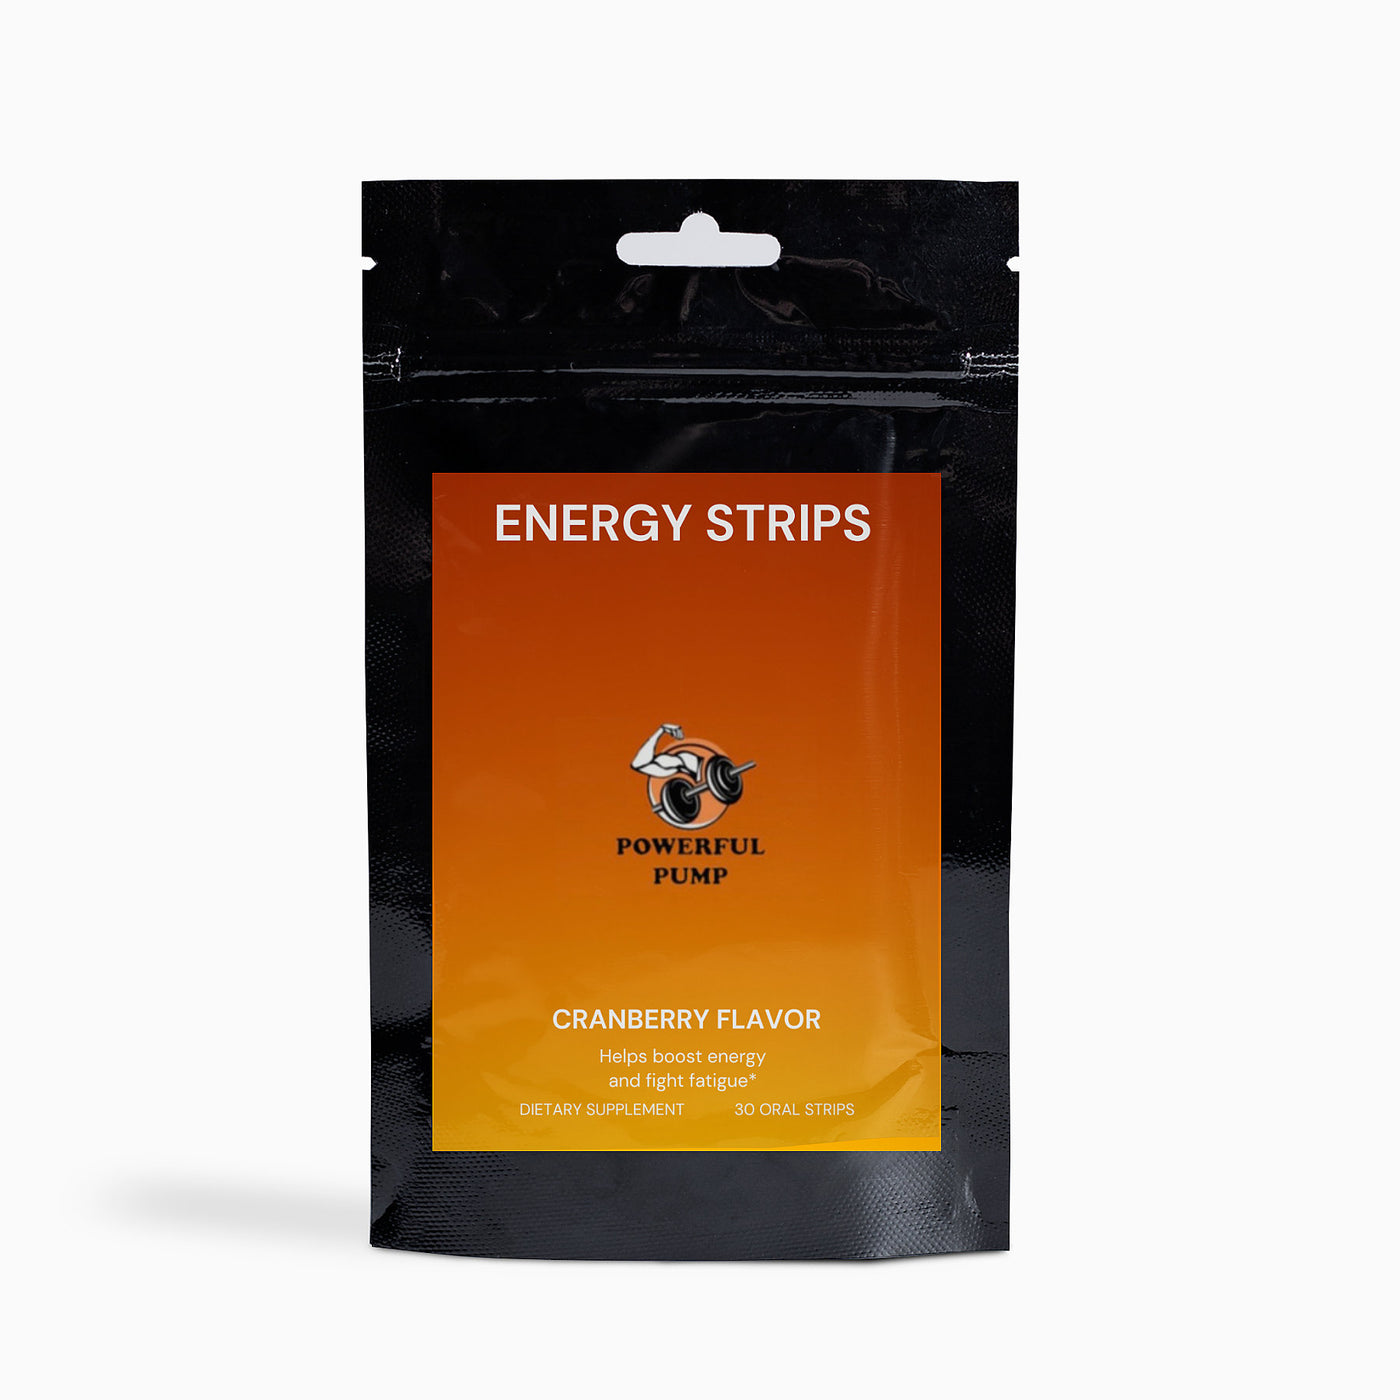 A photo of energy strips supplement - A convenient and portable way to boost energy levels, containing essential vitamins and nutrients for an active lifestyle